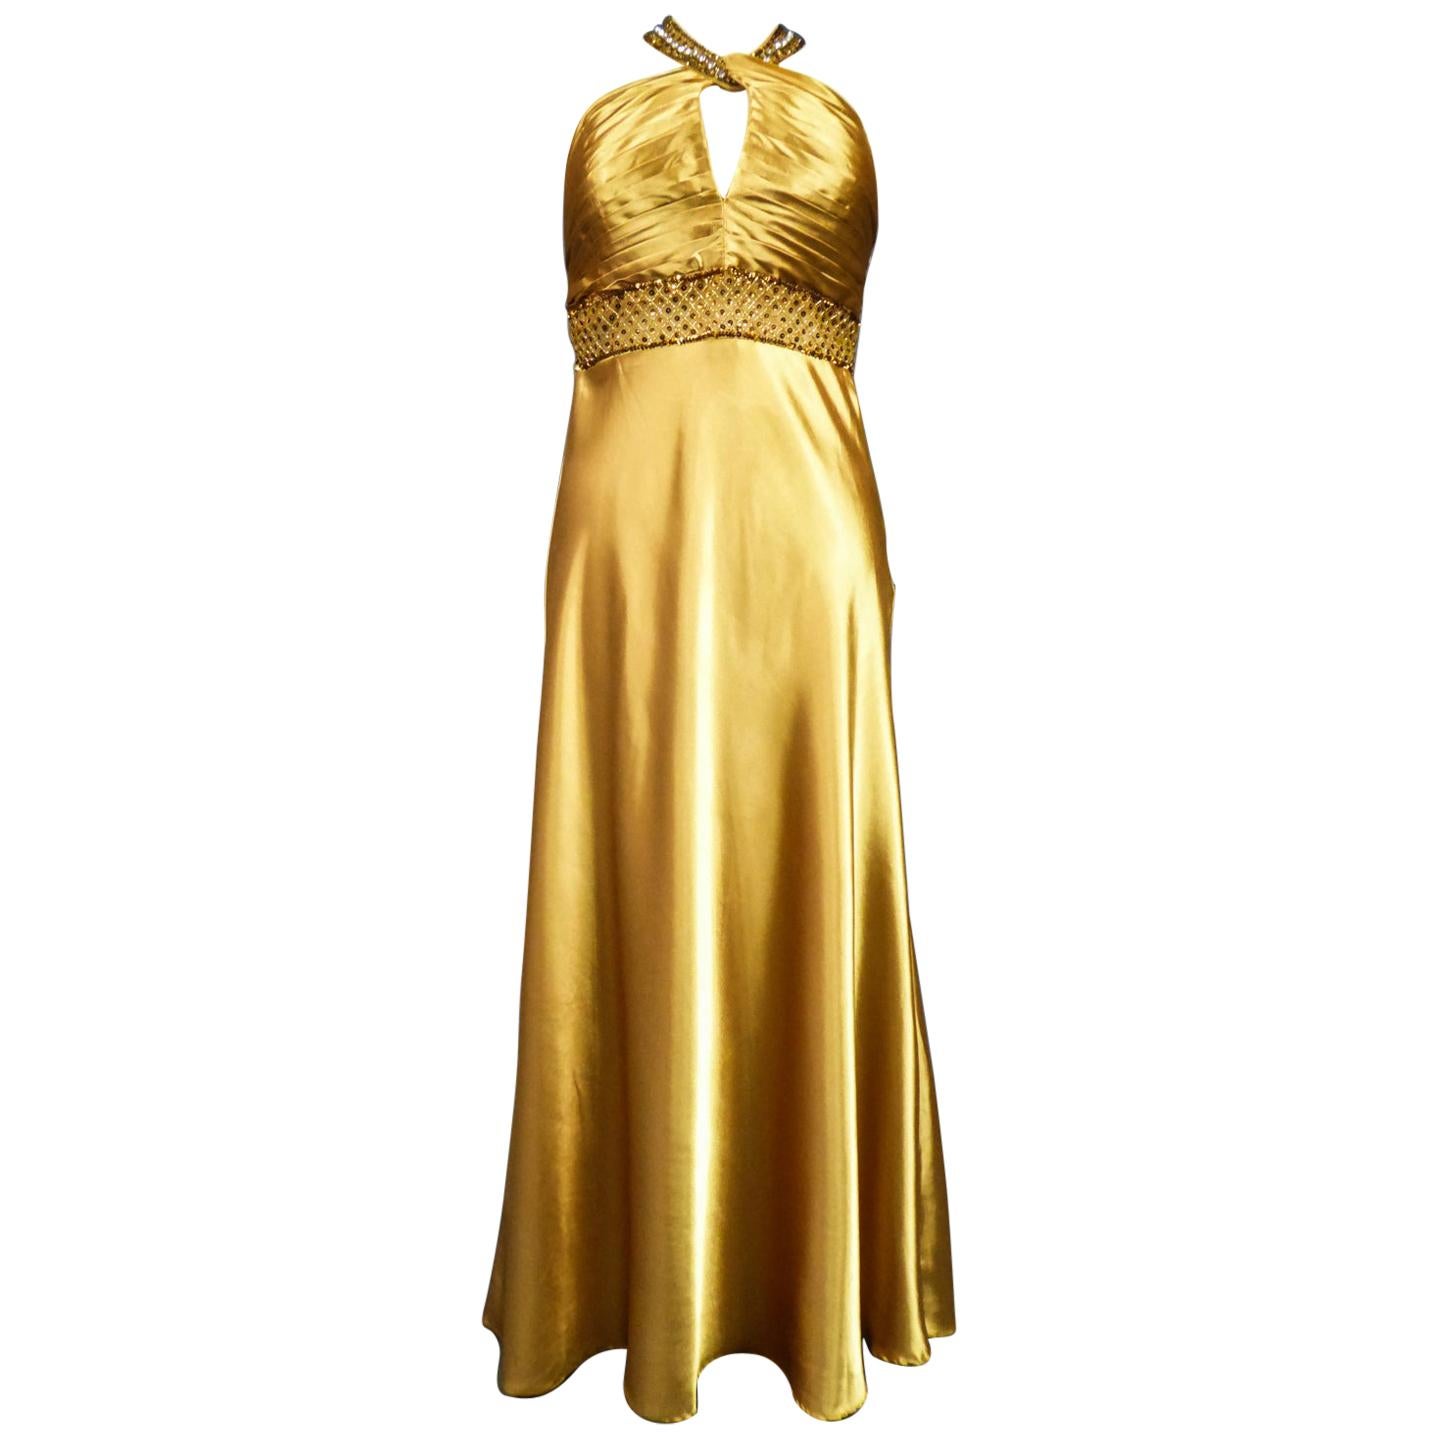 An French Evening Gown in Gold Embroidered Satin with Sequins Circa 1980